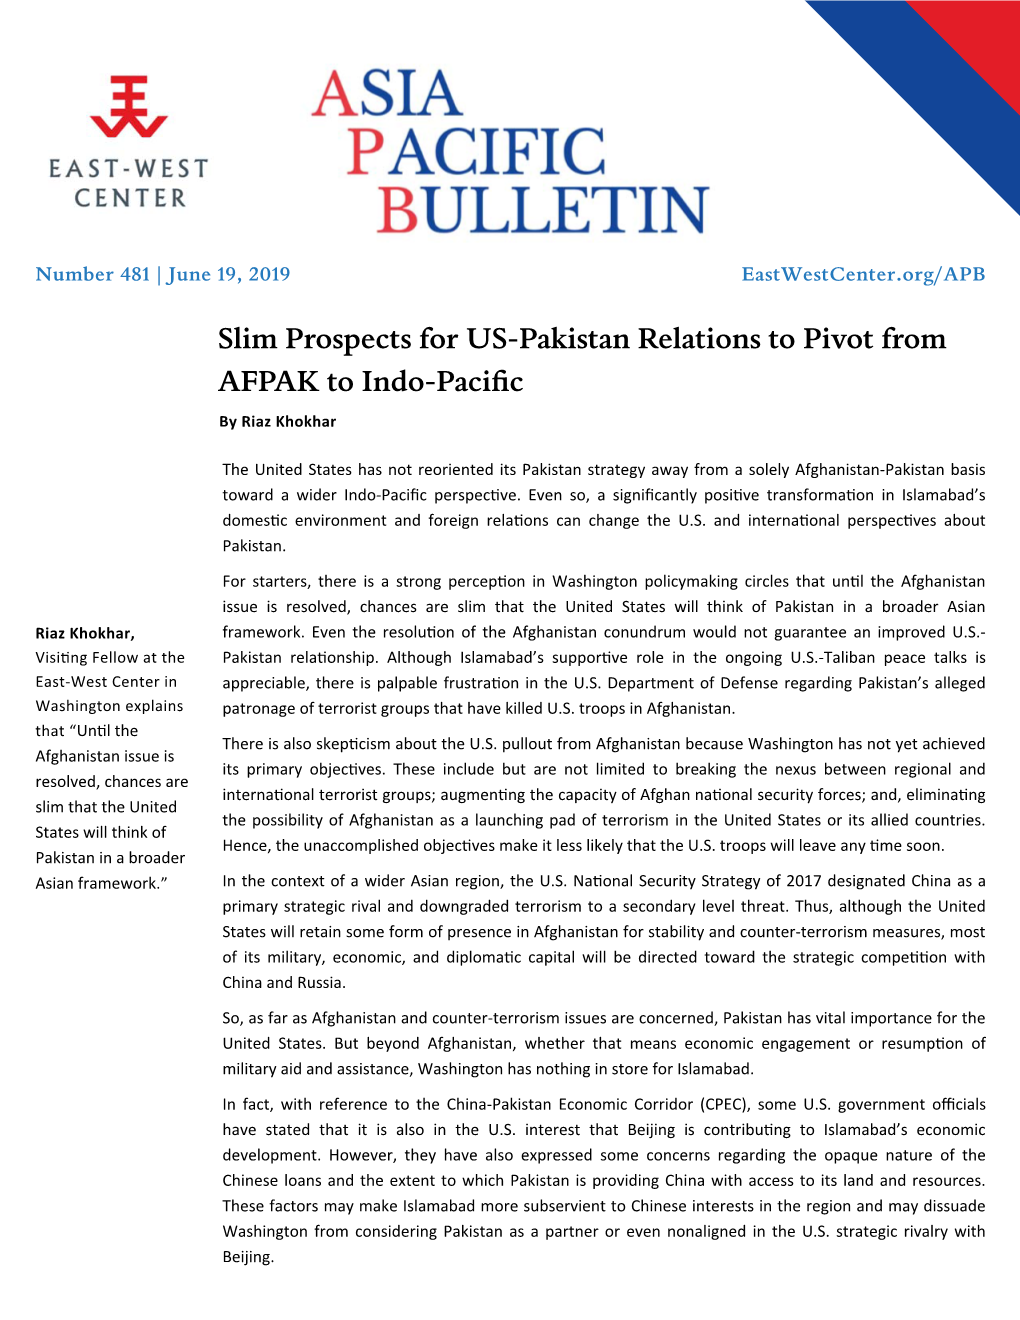 Slim Prospects for US-Pakistan Relations to Pivot from AFPAK to Indo-Paciﬁc by Riaz Khokhar